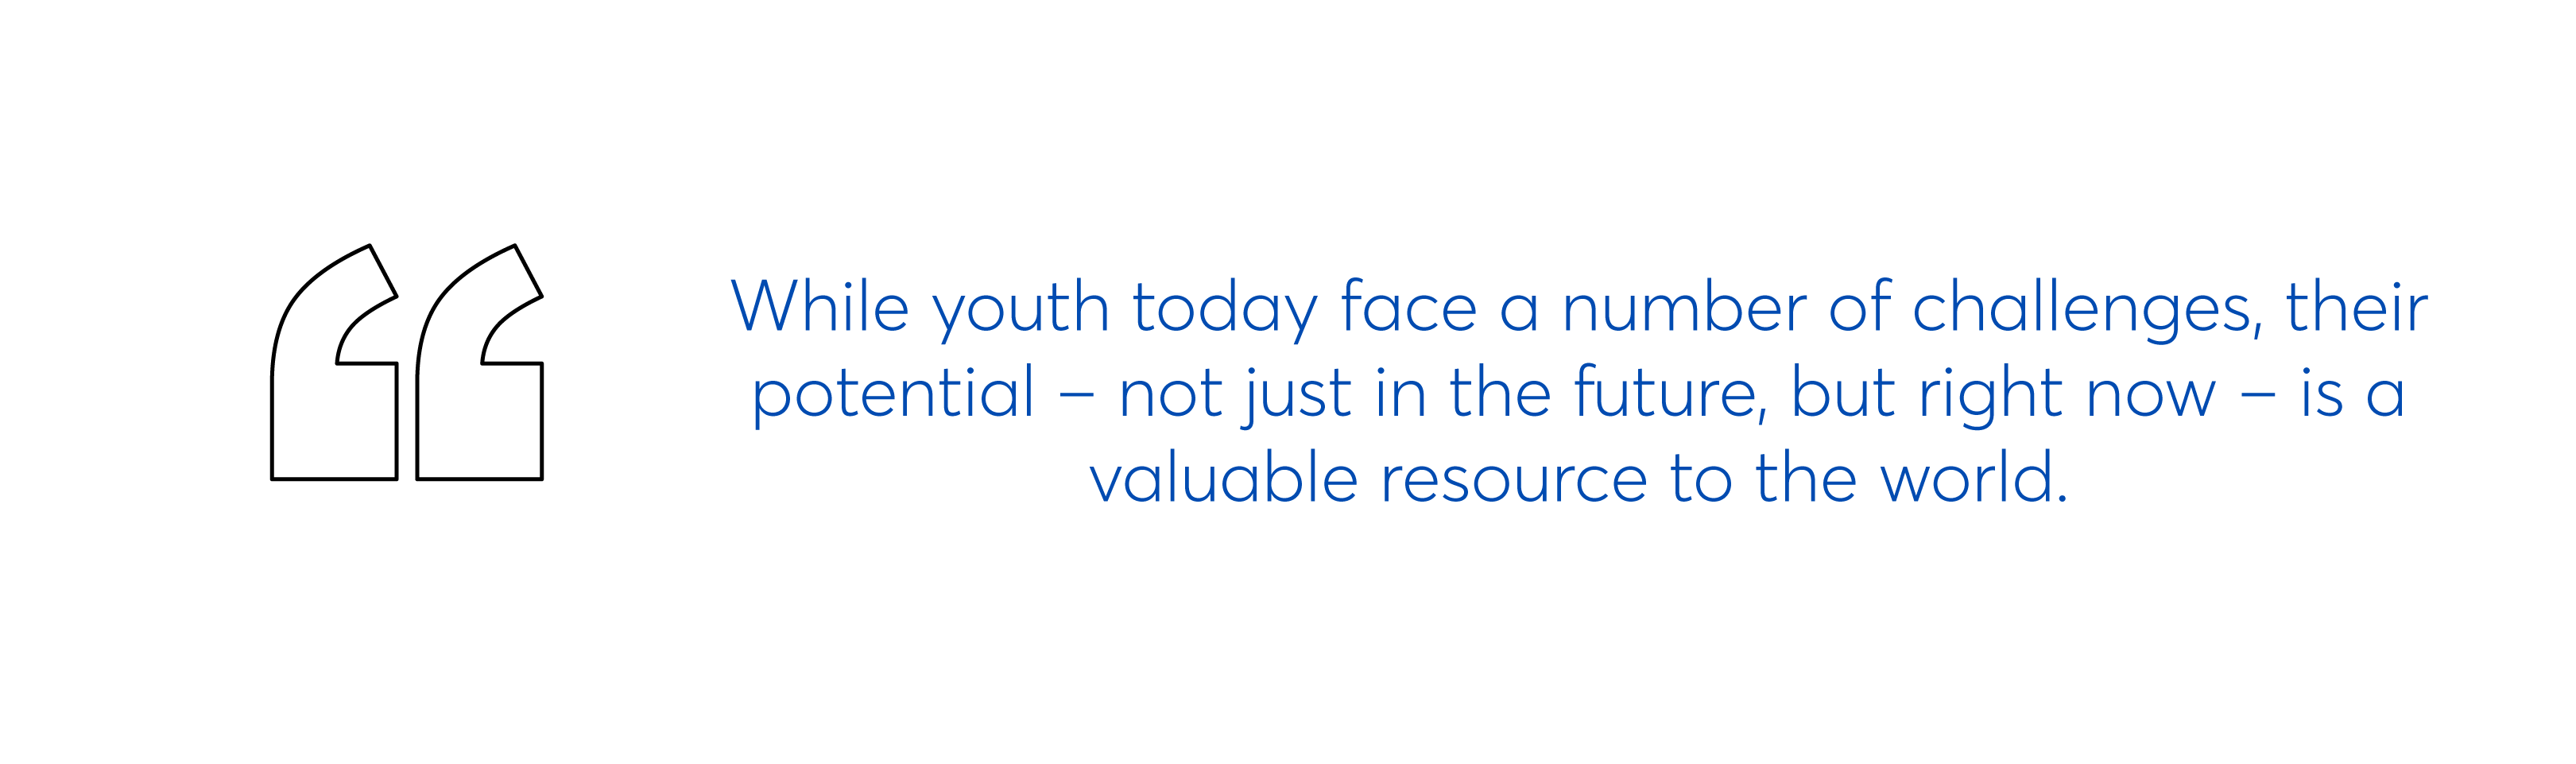 The great value of youth - International Youth Day